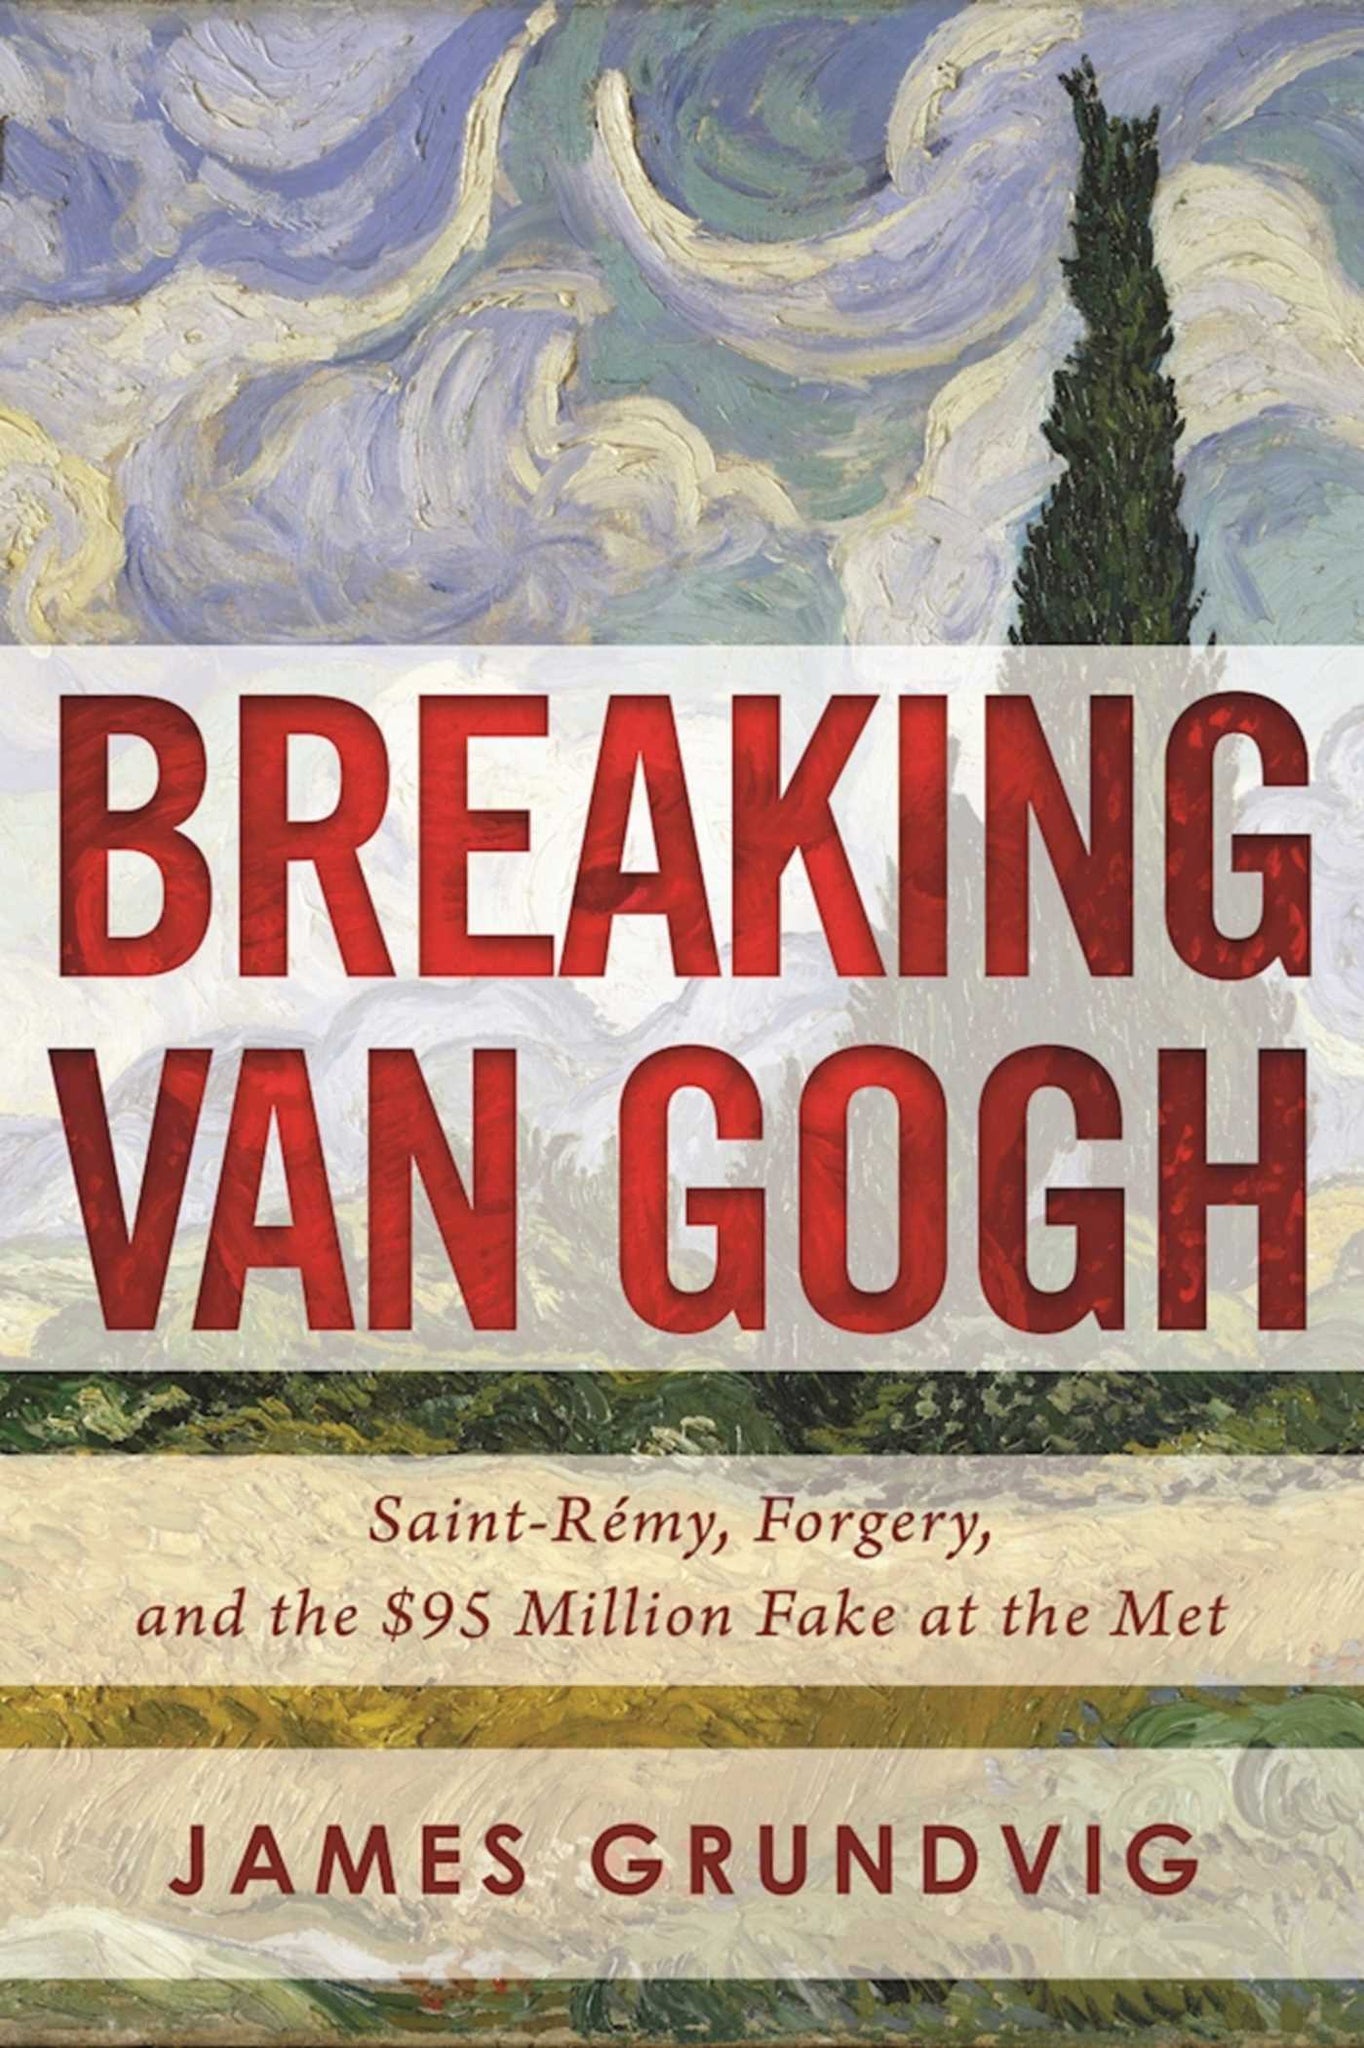 Breaking van Gogh : Saint-Rémy, Forgery, and the $95 Million Fake at the Met